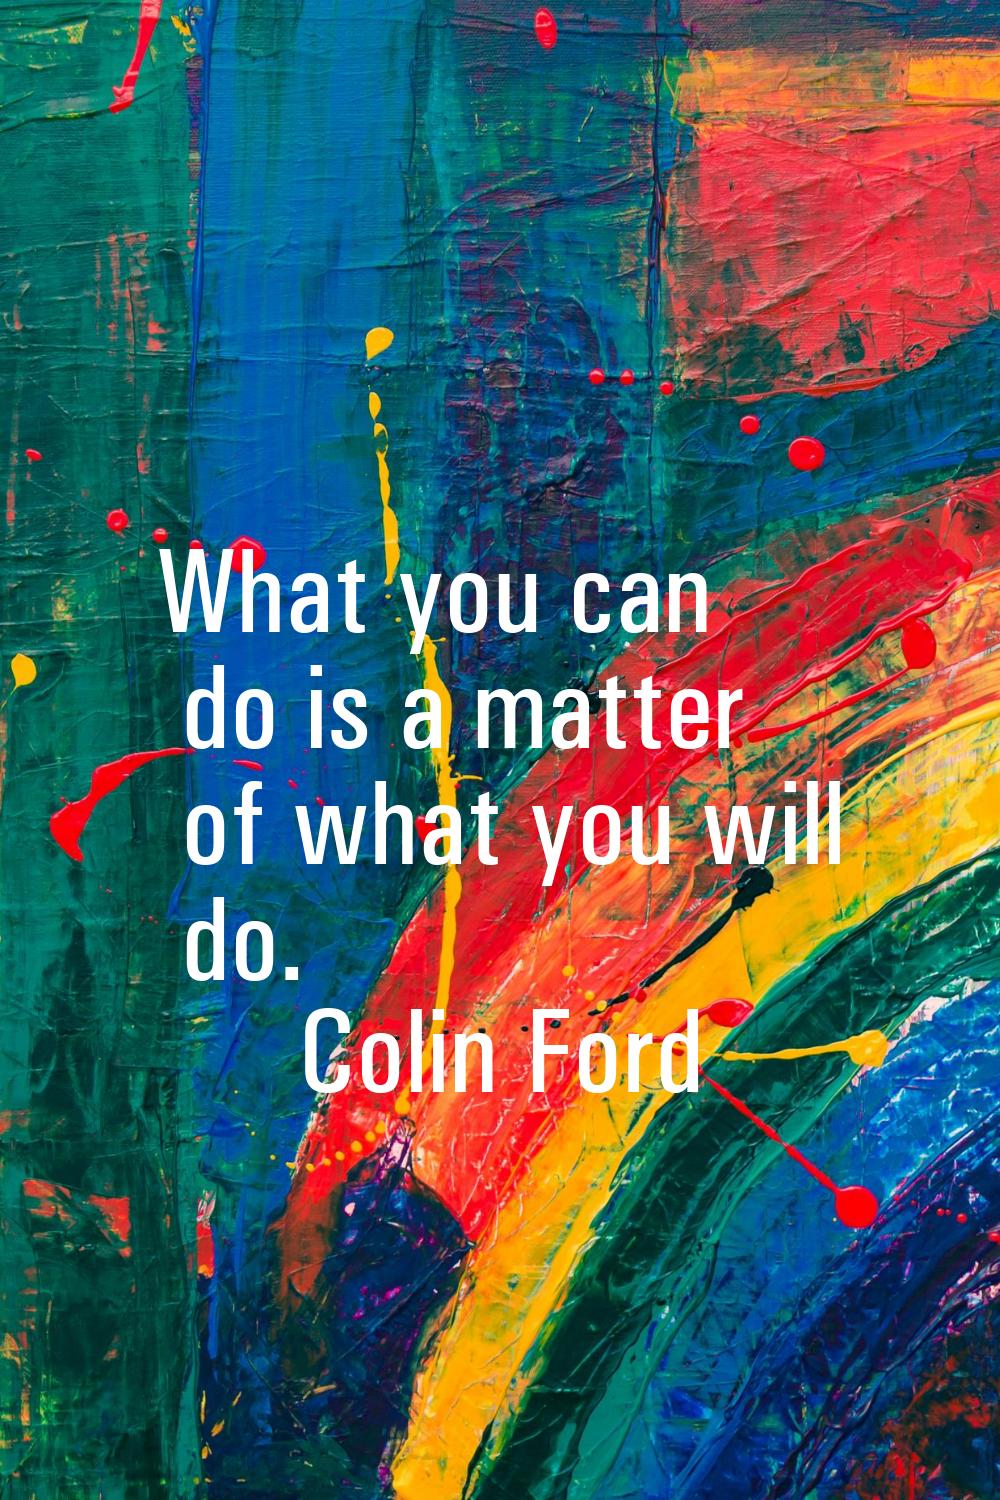 What you can do is a matter of what you will do.